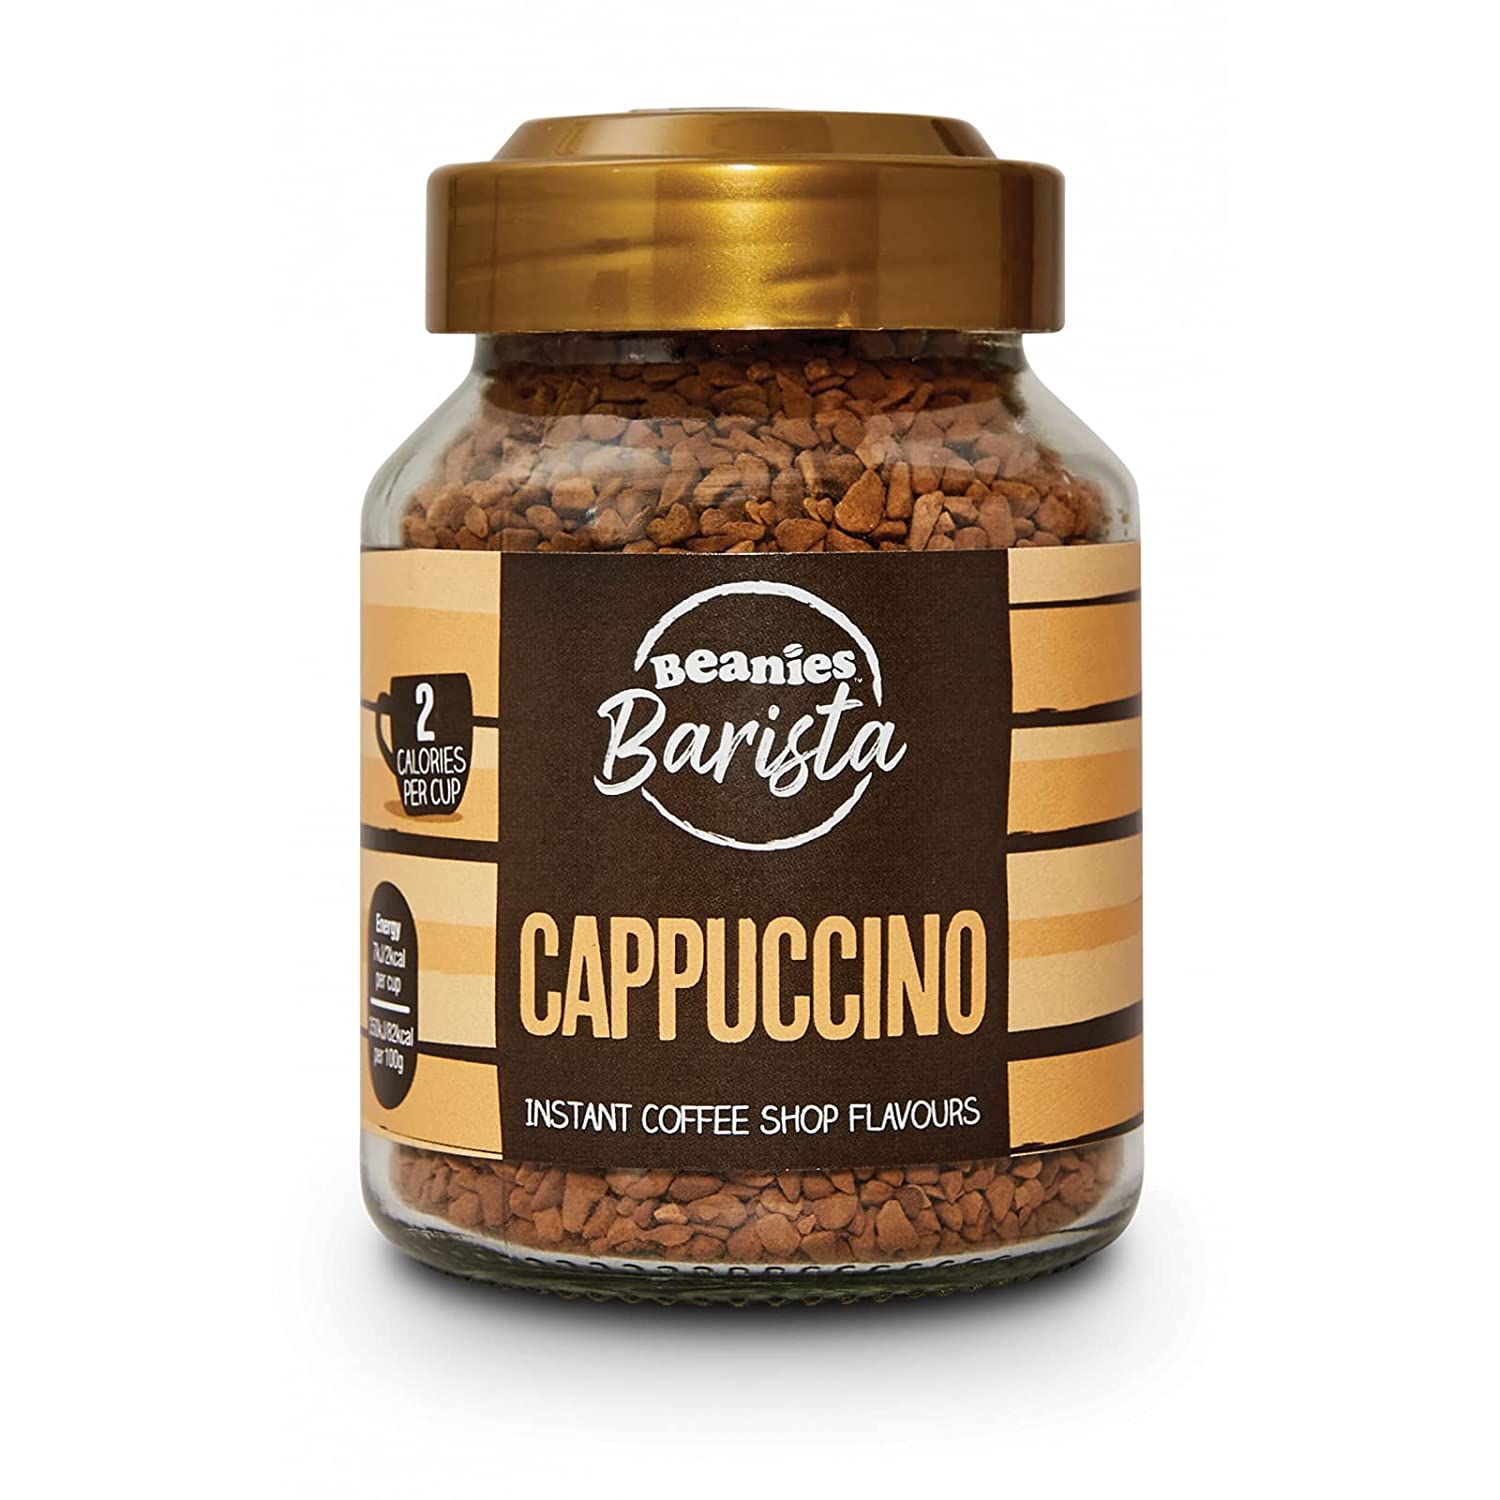 Beanies Barista Cappuccino Instant Coffee Image